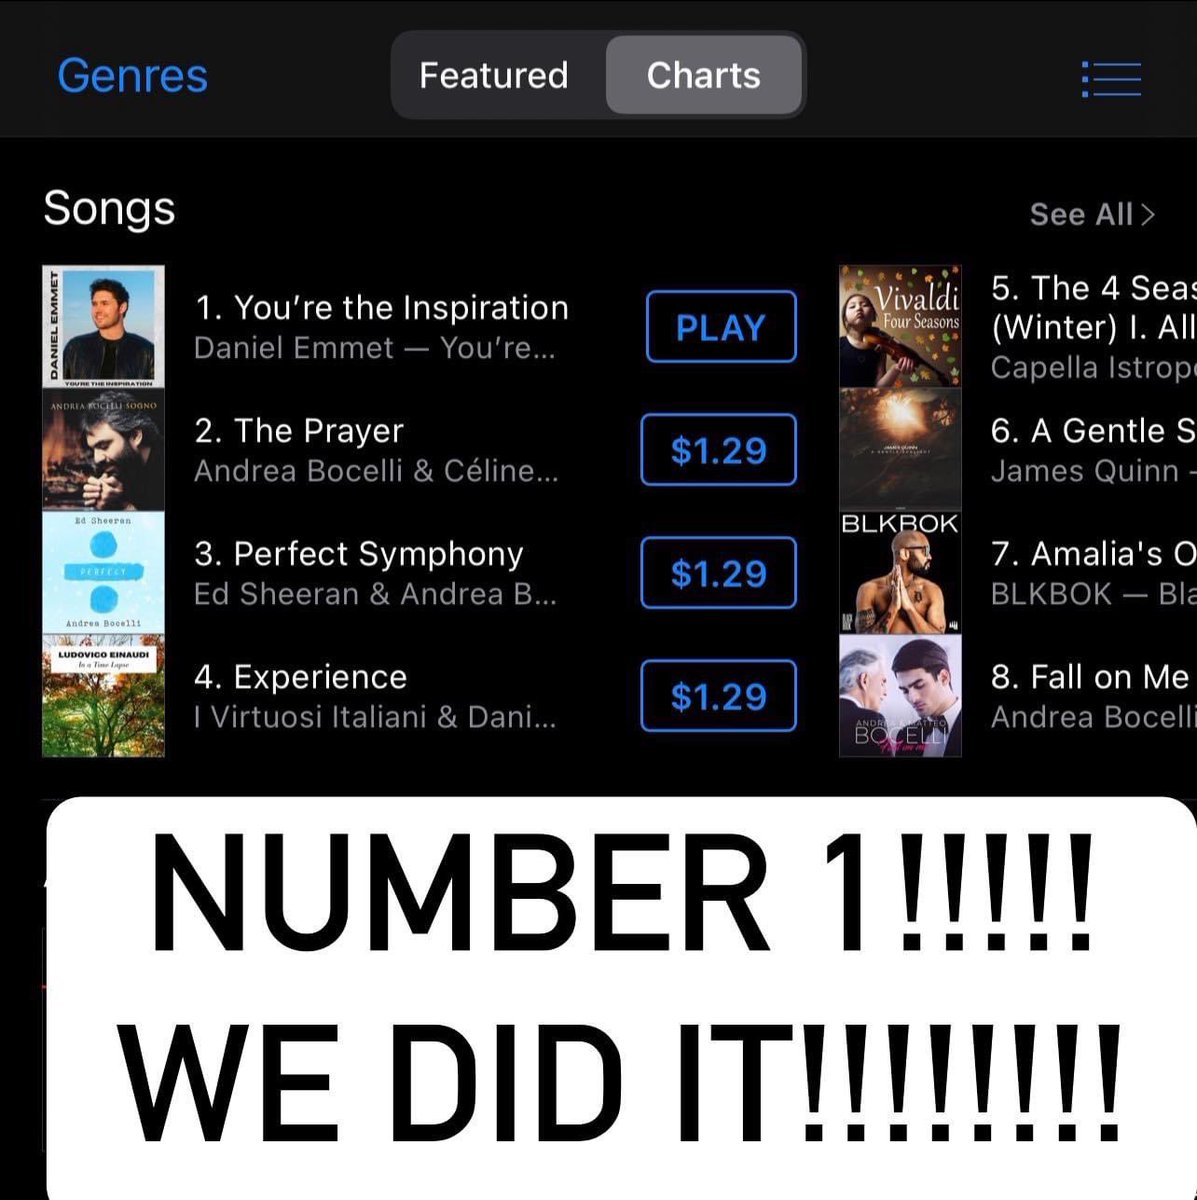 WE DID IT!! Number 1 song on iTunes classical!!!! Thank you all so much!!!! What a way to kick off the holiday season!!! YOU ALL are my inspiration! #danielemmet #newsong #agt #onthecharts